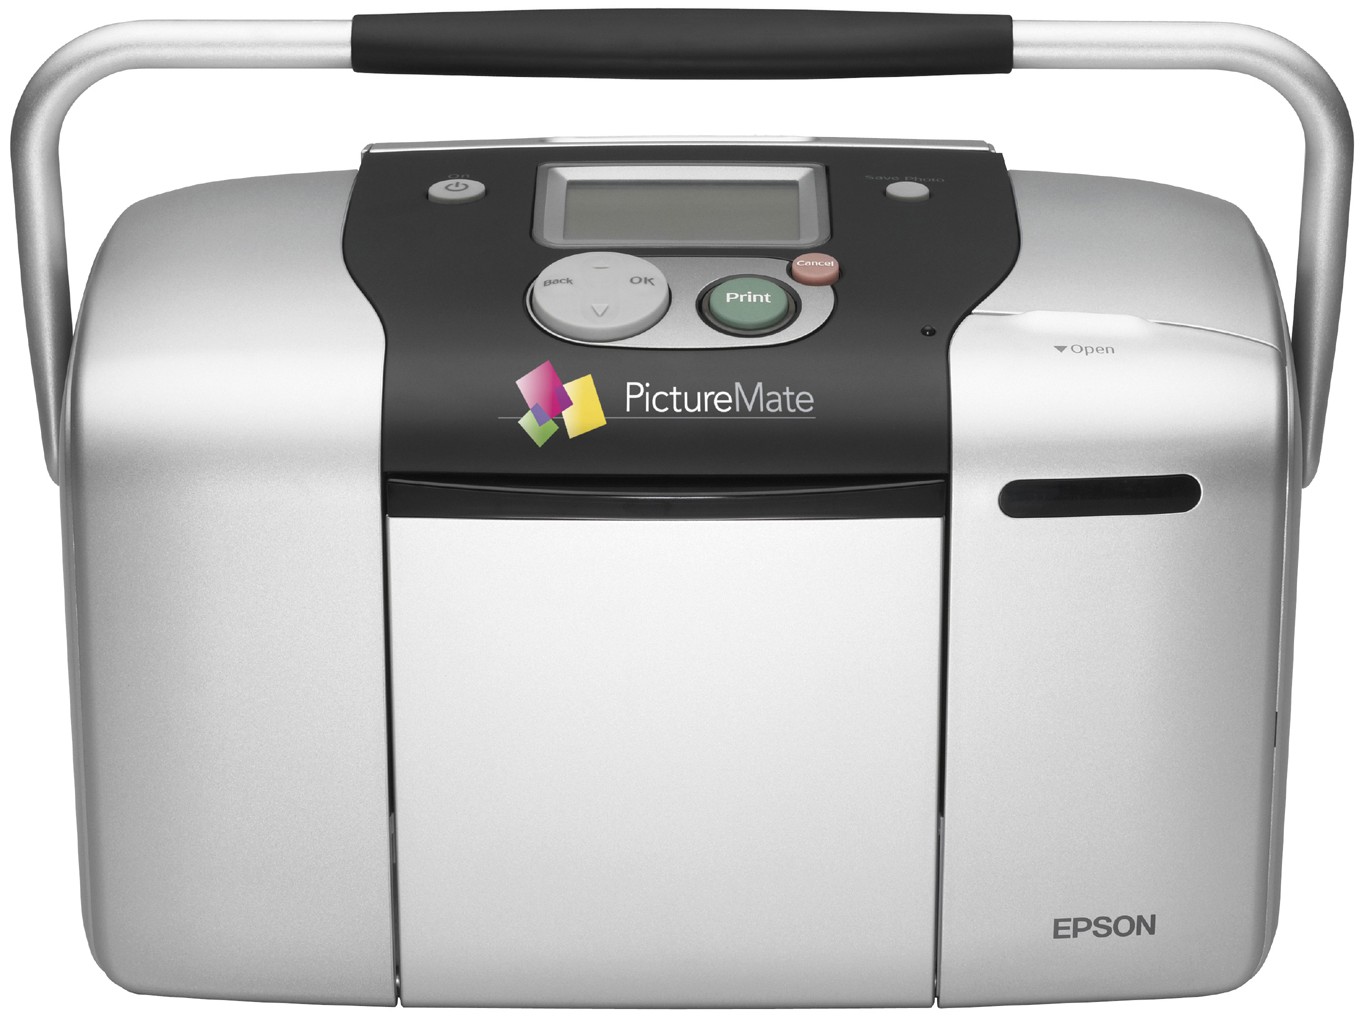 Step-by-step Driver Epson Printer Picturemate Elementary OS Installation - Featured